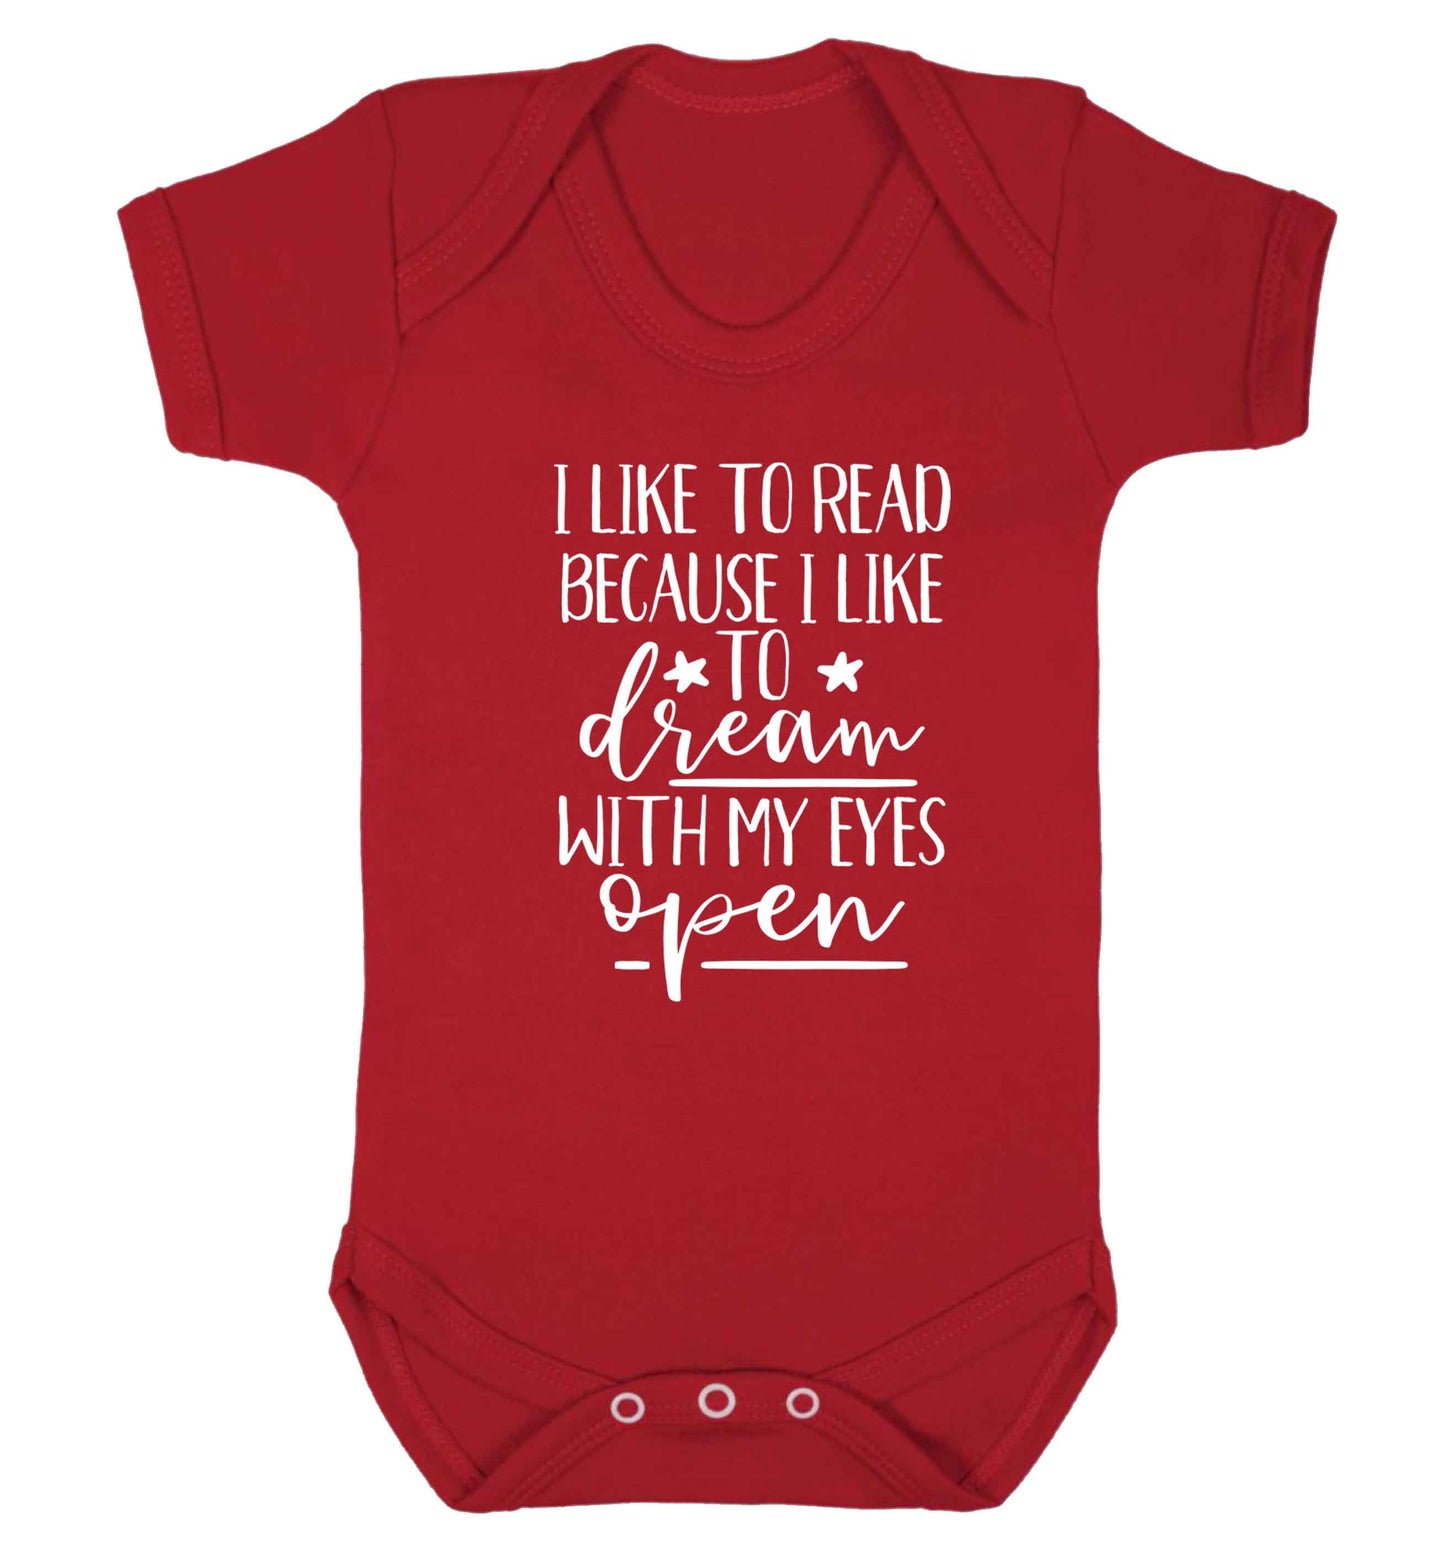 I like to read because I like to dream with my eyes open Baby Vest red 18-24 months